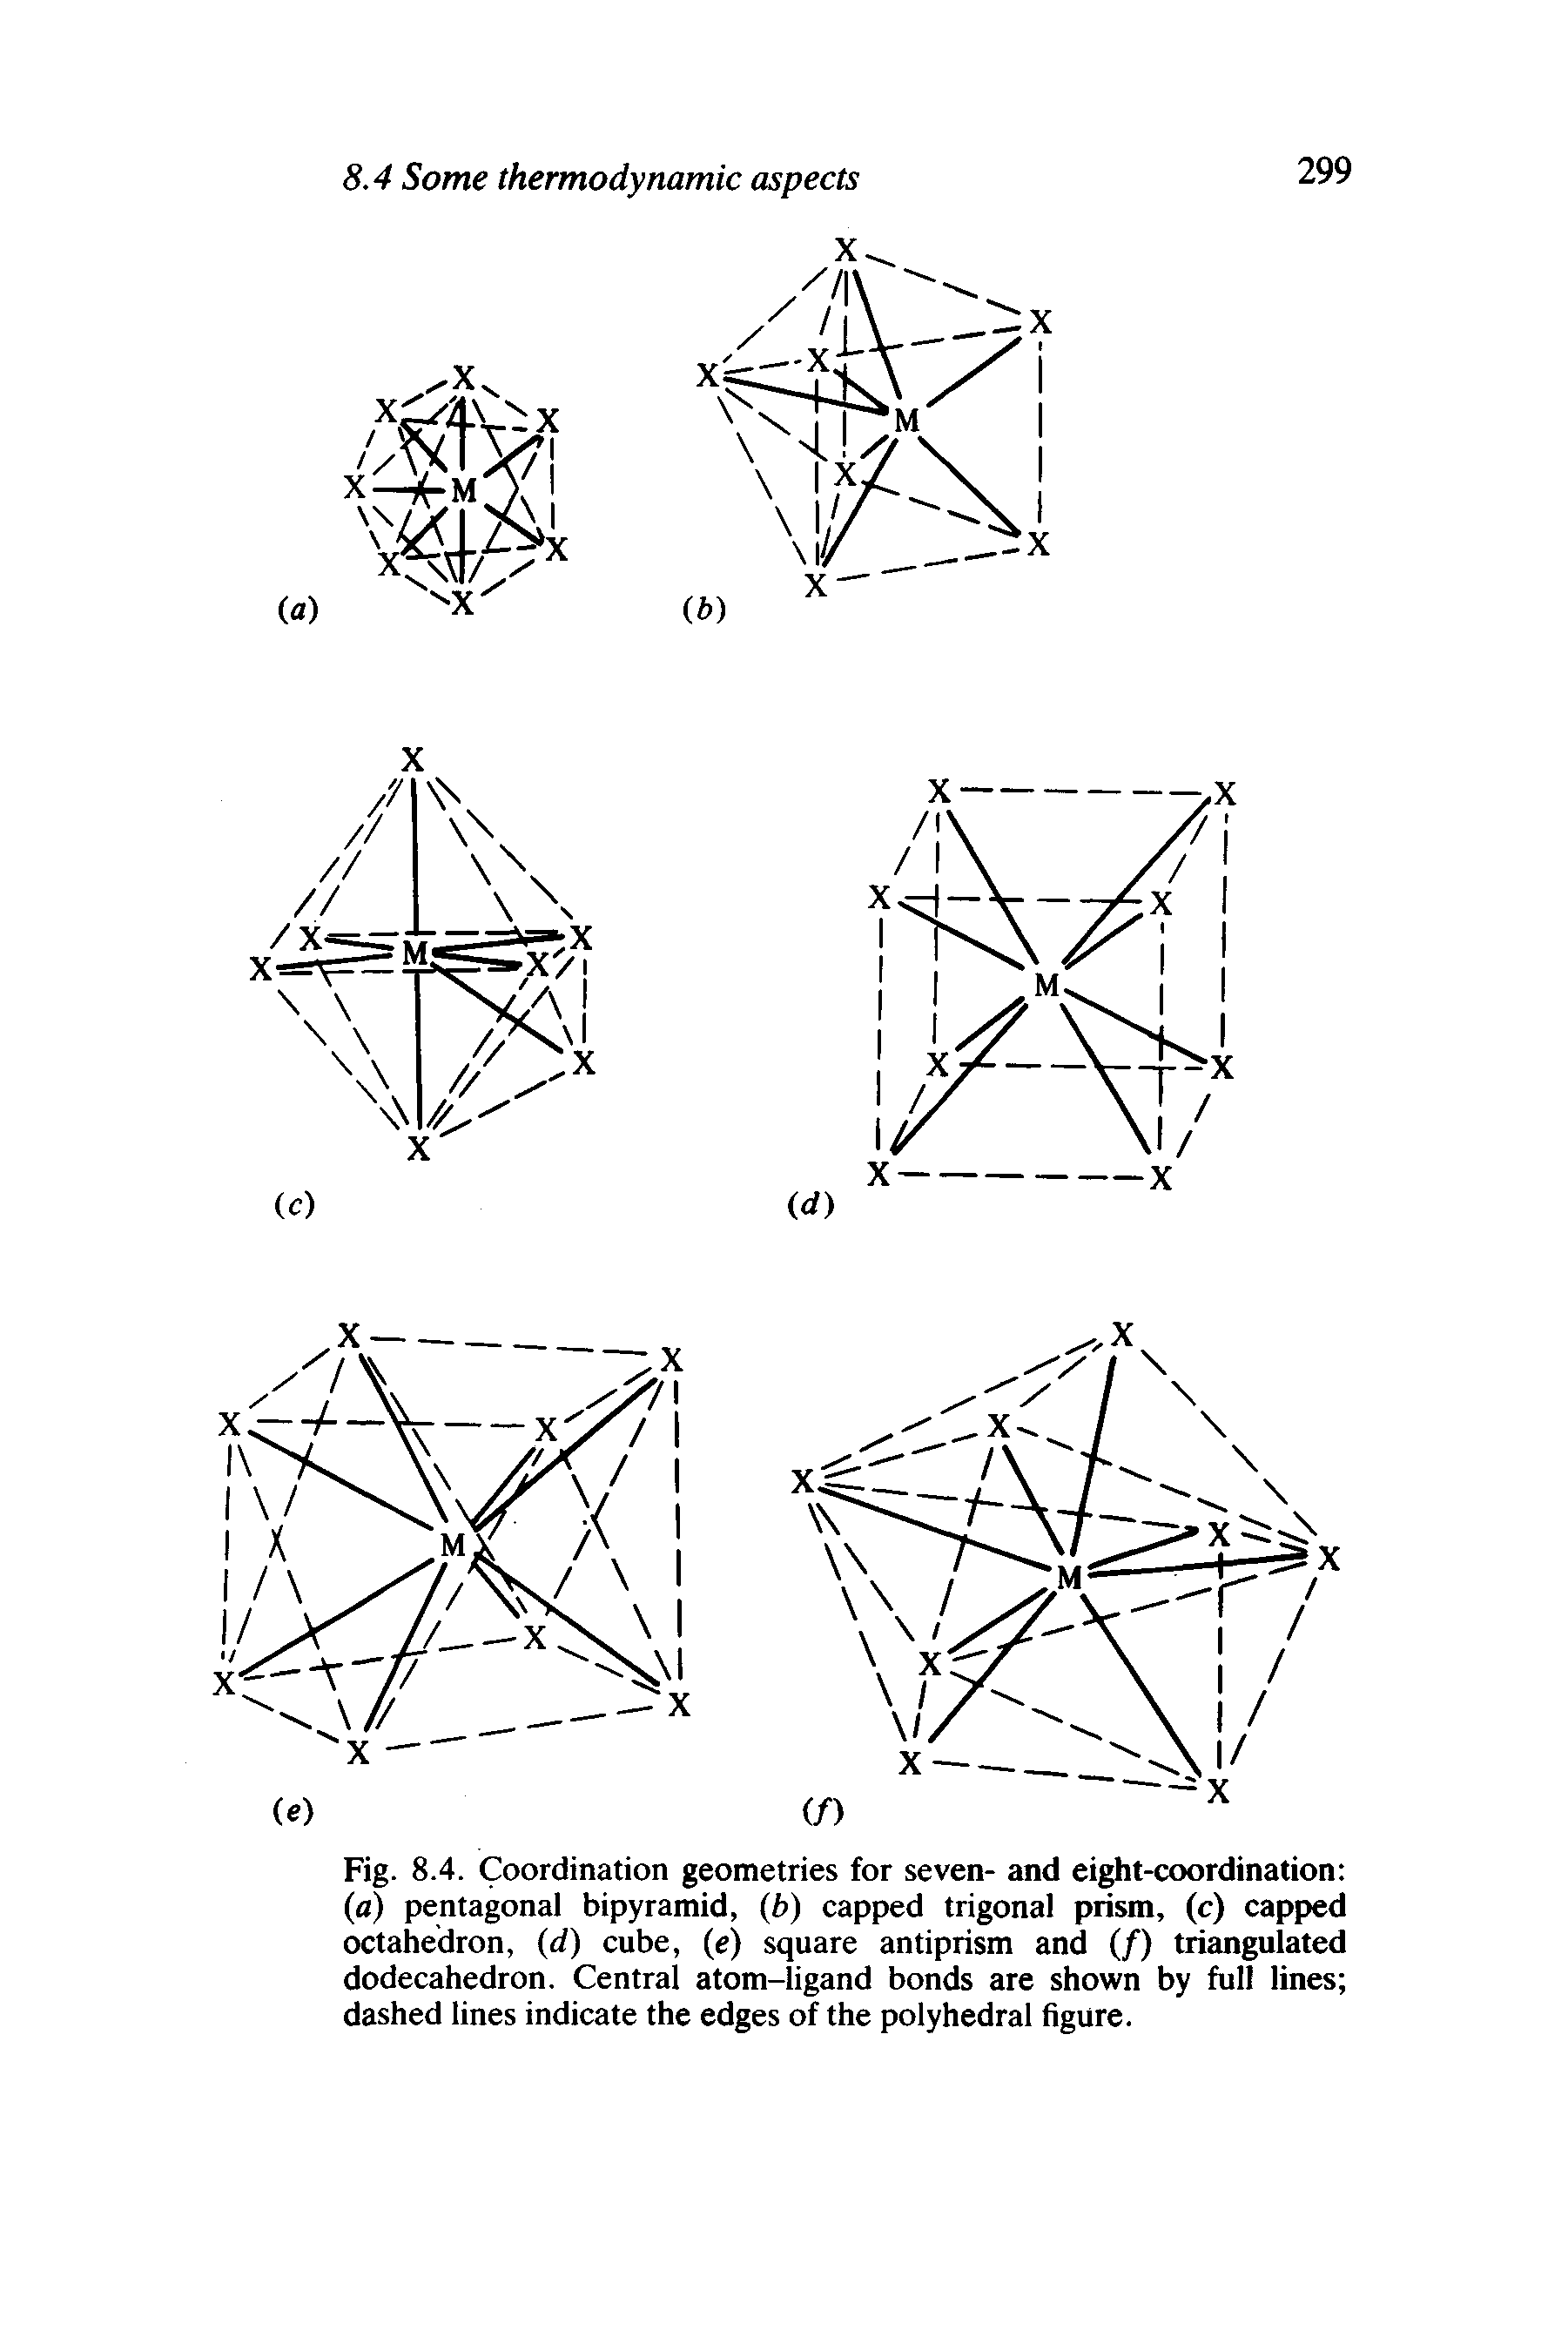 Fig. 8.4. Coordination geometries for seven- and eight-coordination (a) pentagonal bipyramid, (b) capped trigonal prism, (c) capped octahedron, (d) cube, (e) square antiprism and (/) triangulated dodecahedron. Central atom-ligand bonds are shown by full lines dashed lines indicate the edges of the polyhedral figure.